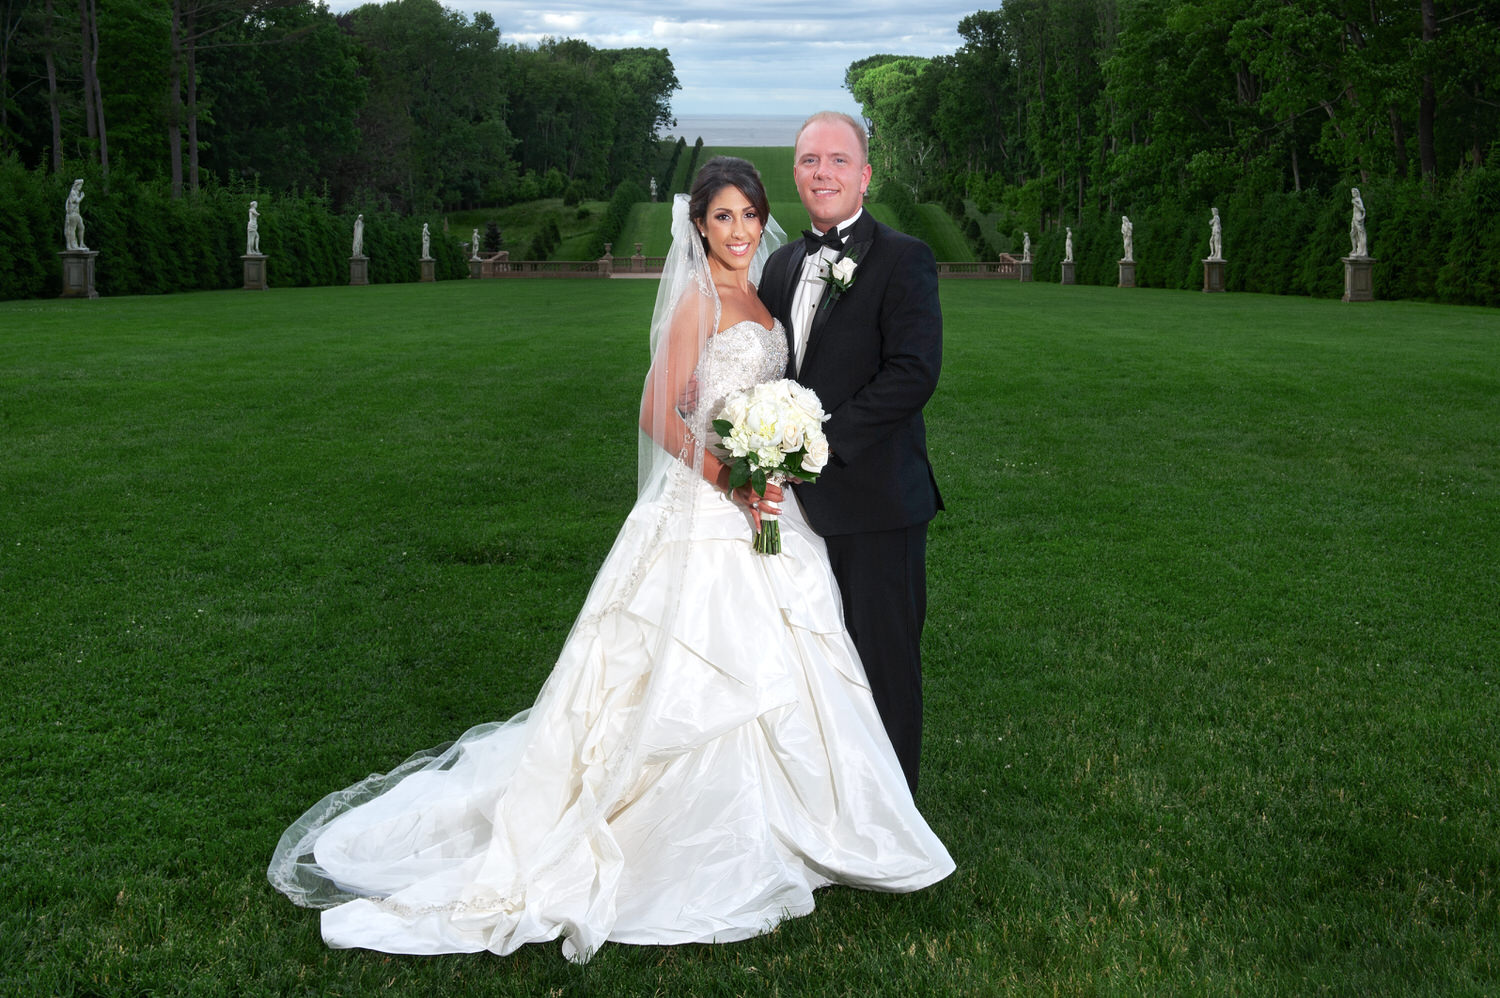 A bride and groom pose on a vast, manicured lawn flanked by statues, with the expansive greenery and distant trees creating a grand backdrop. ​